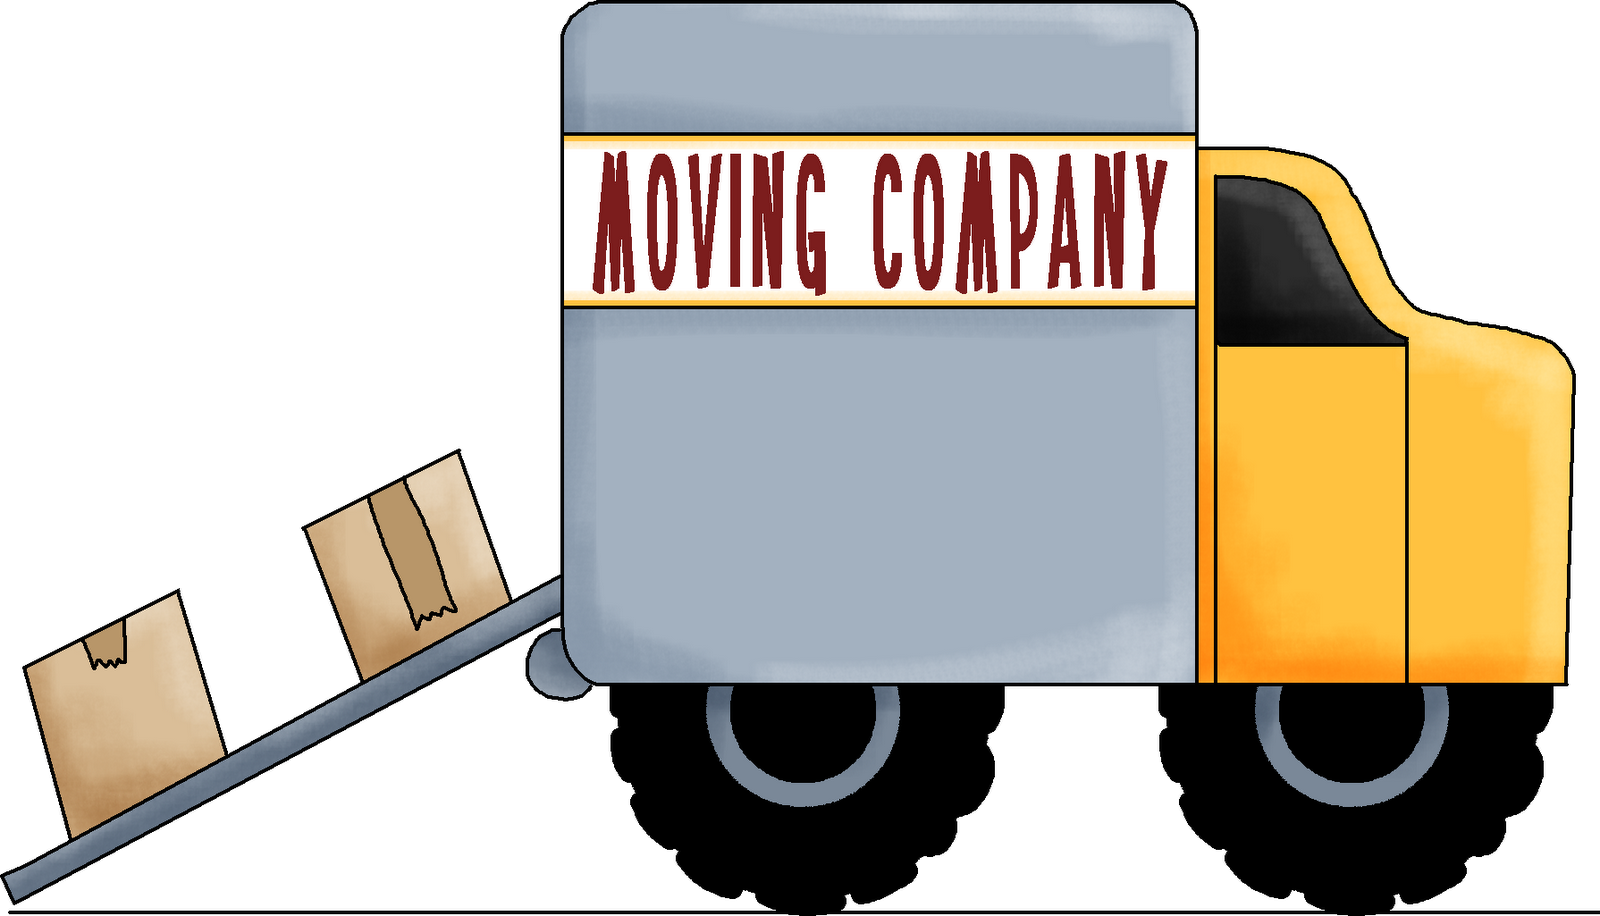 Moving Company Truck Illustration PNG